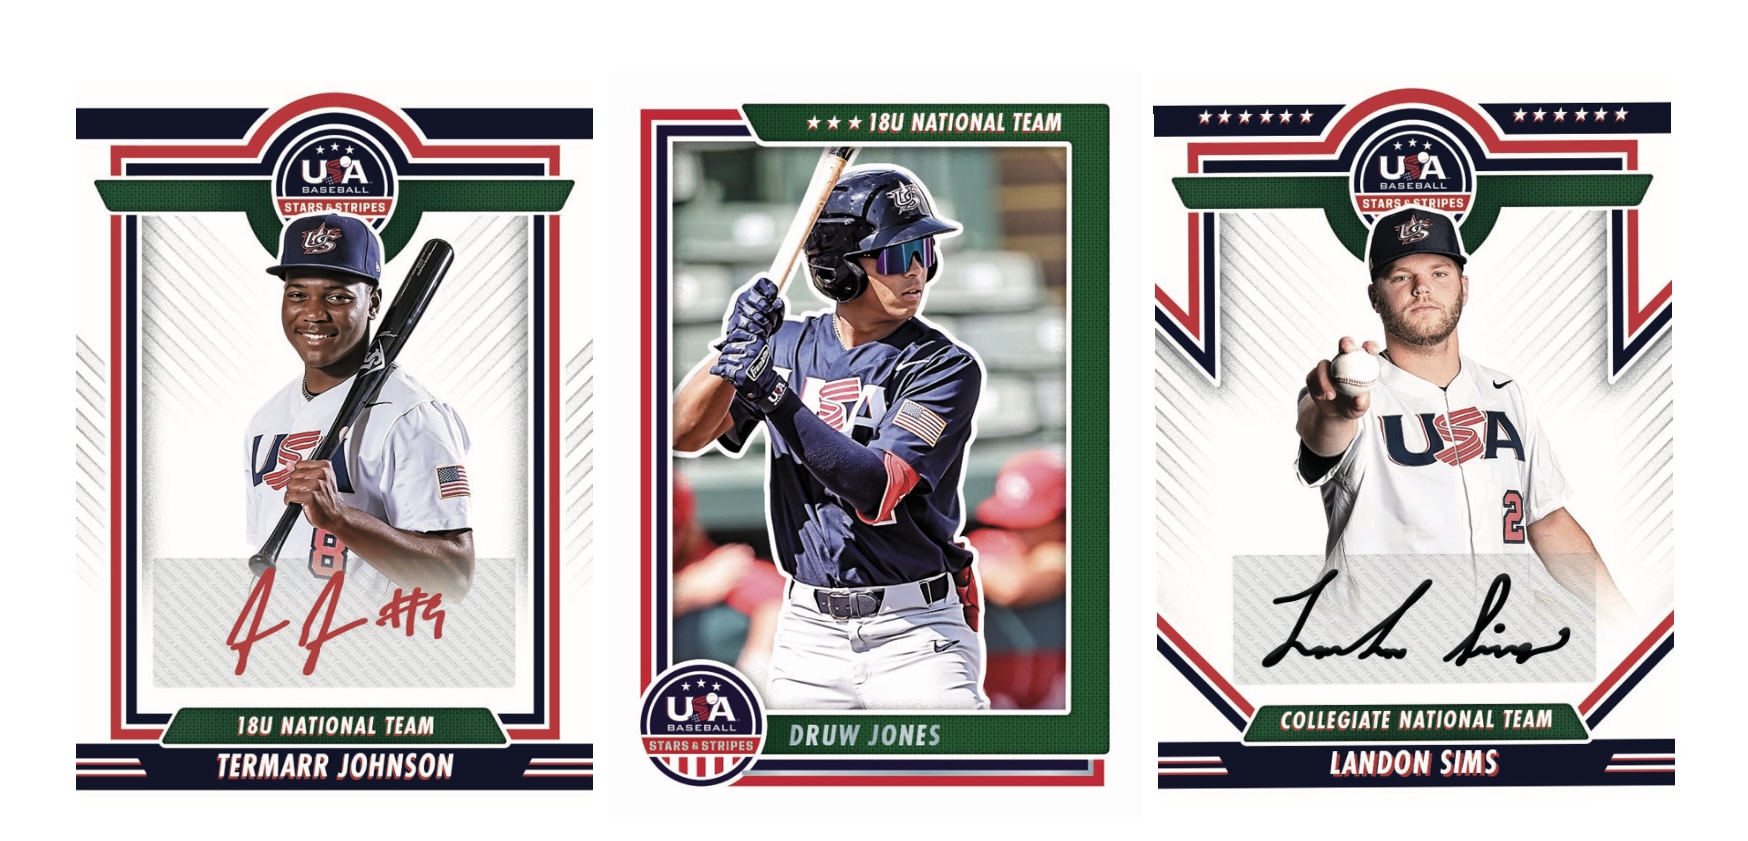 USA Baseball and Panini America Extend Exclusive Trading Card Agreement